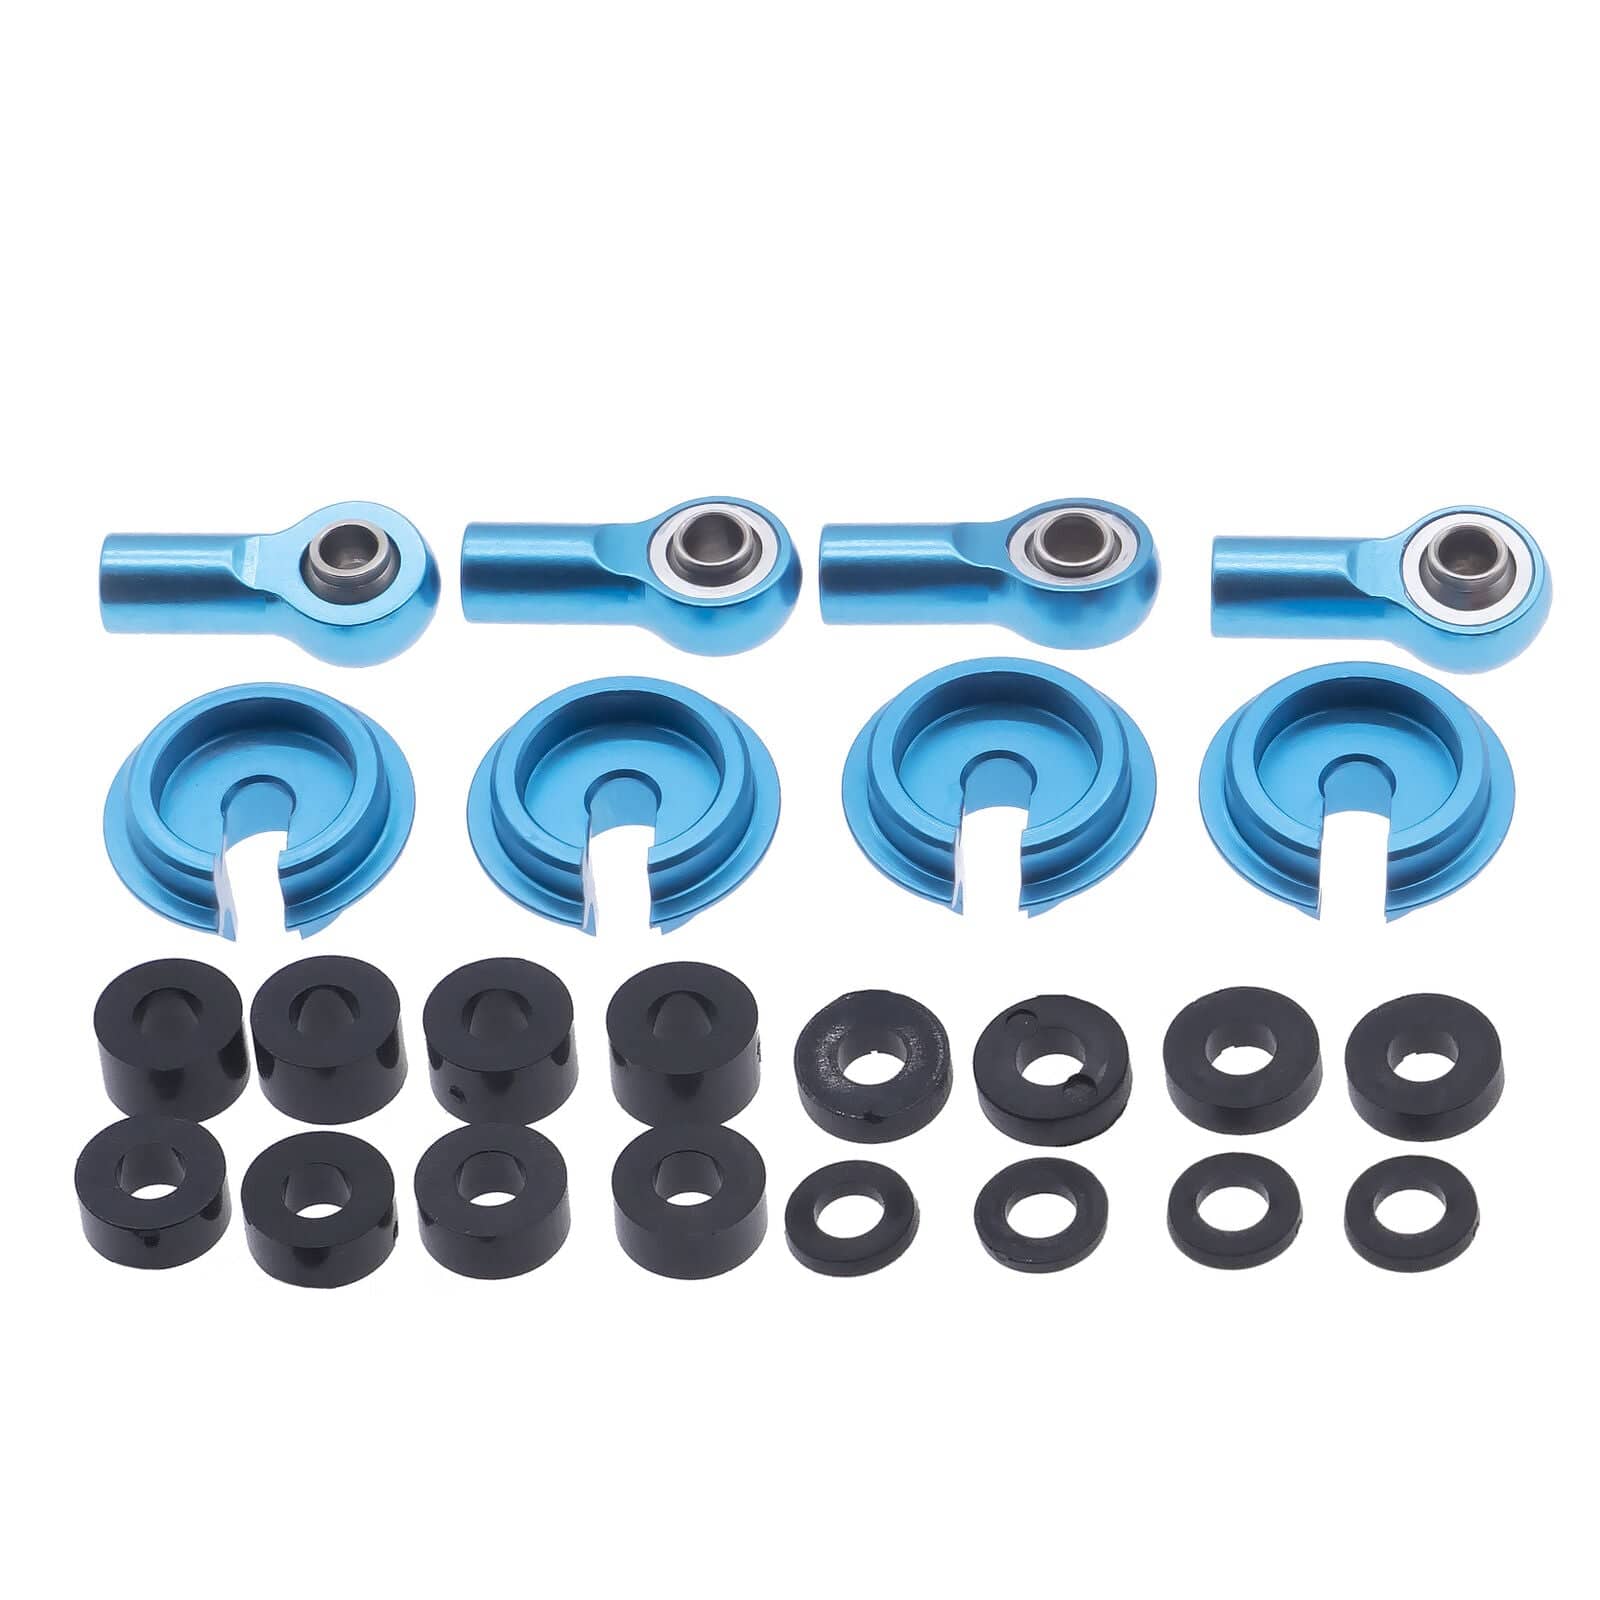 RCAWD ECX UPGRADE PARTS Blue RCAWD Shock Ends Spring Cups Spring Clips for 1/10 ECX 2WD Series